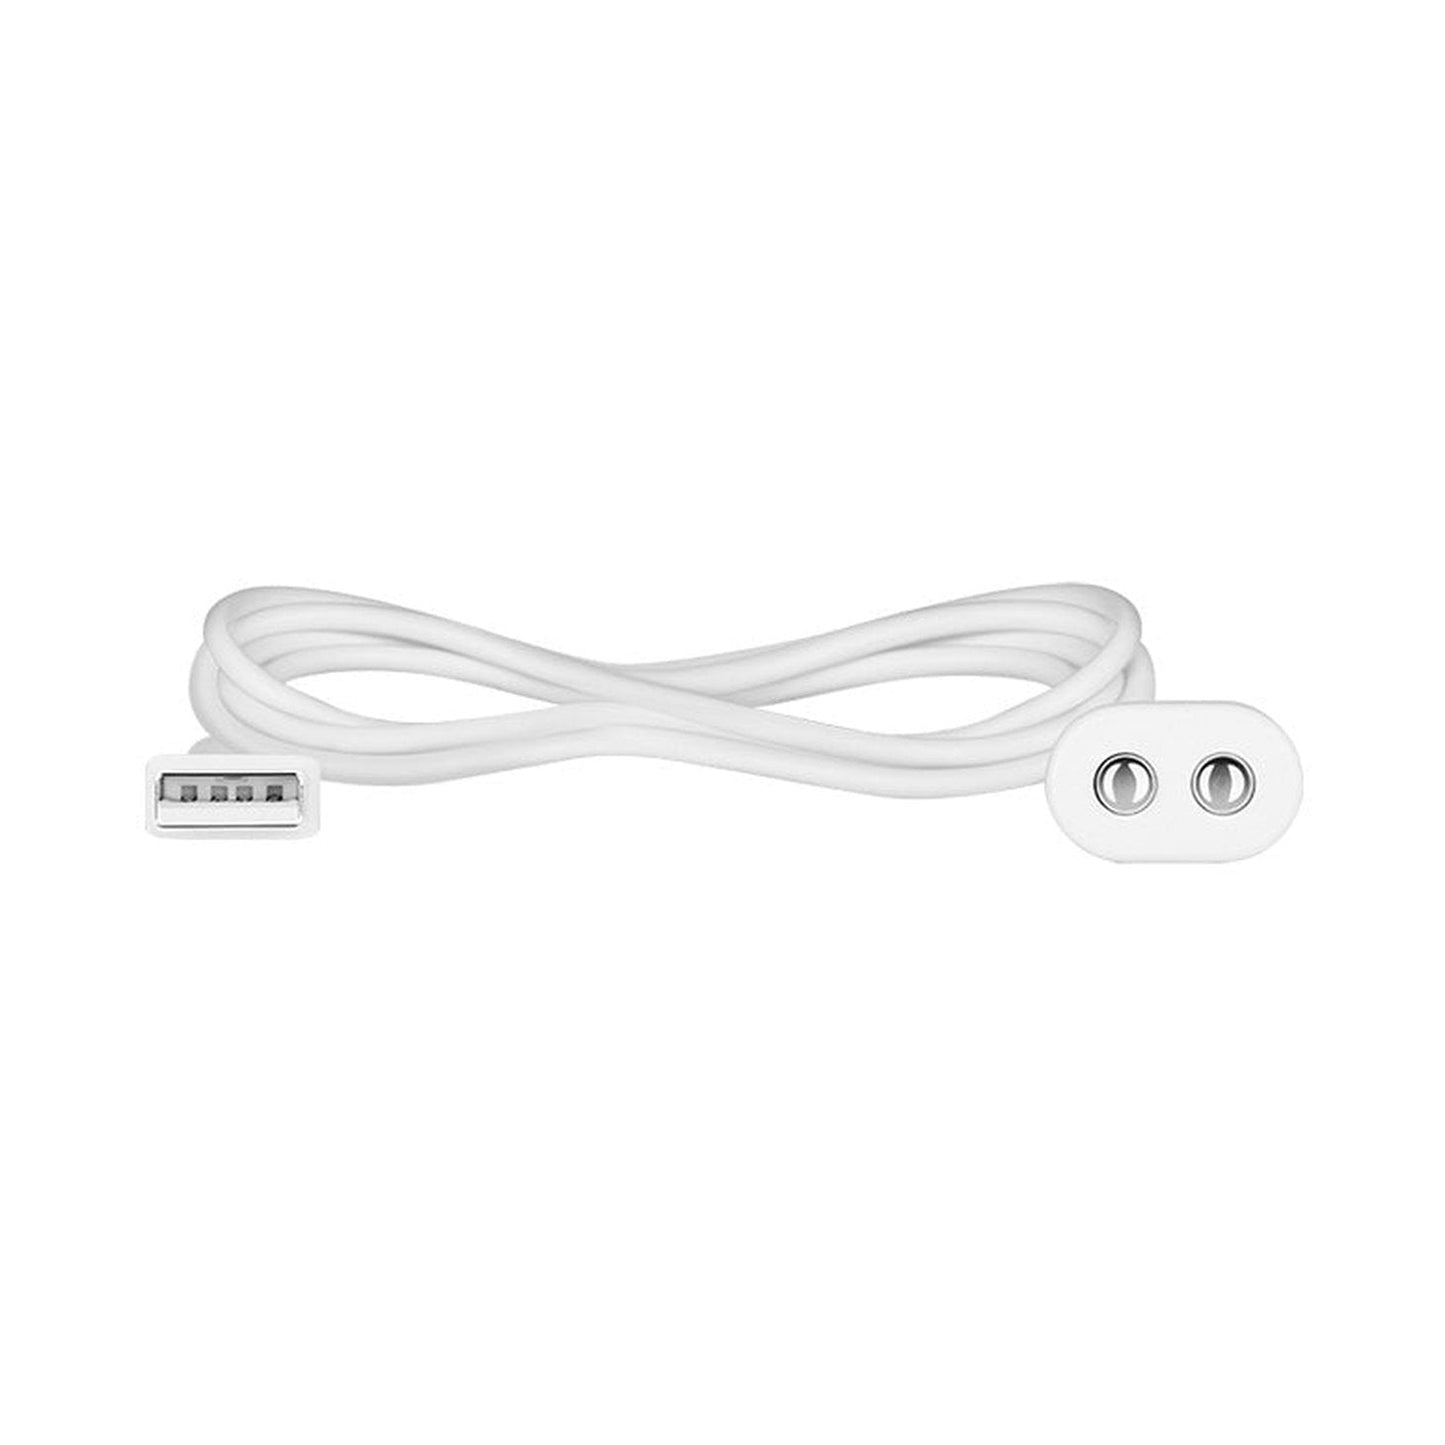 USB Charging Cable - White